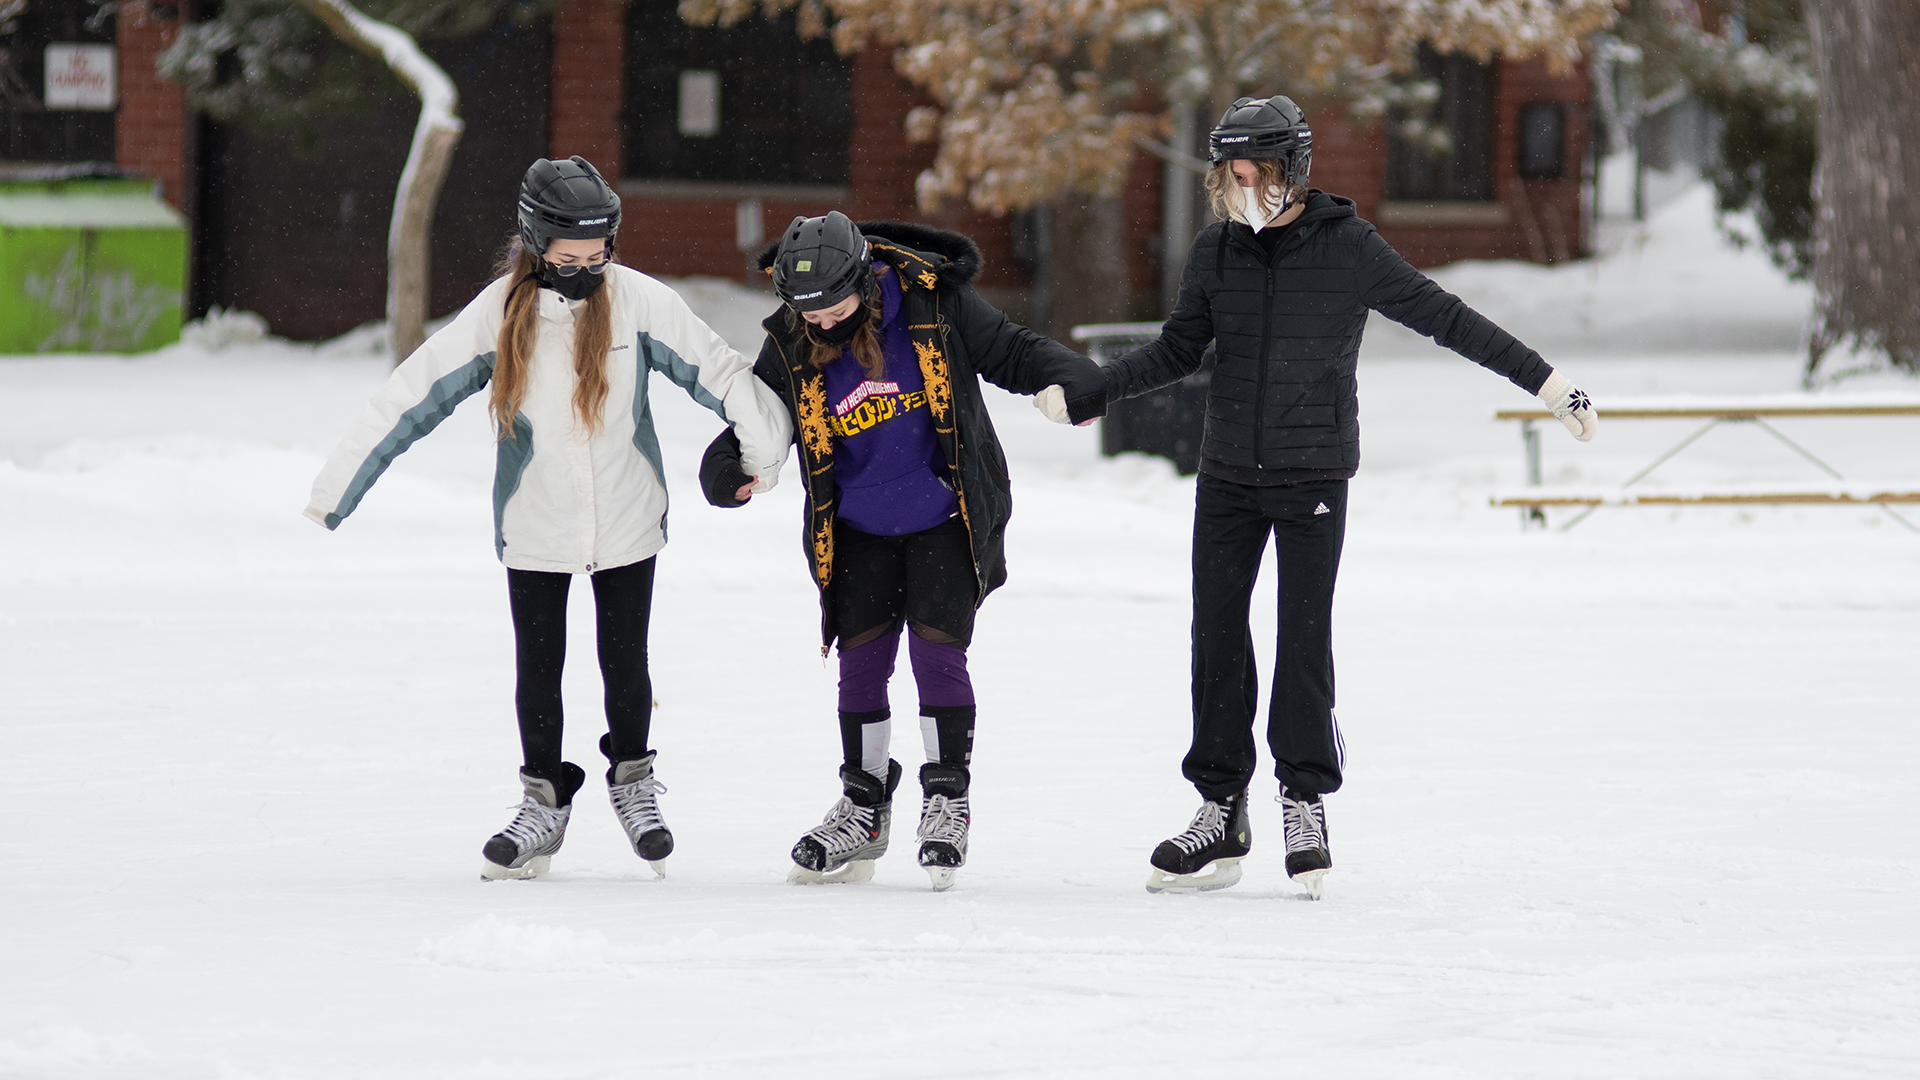 Photo of three students skating together, to support the one in the middle